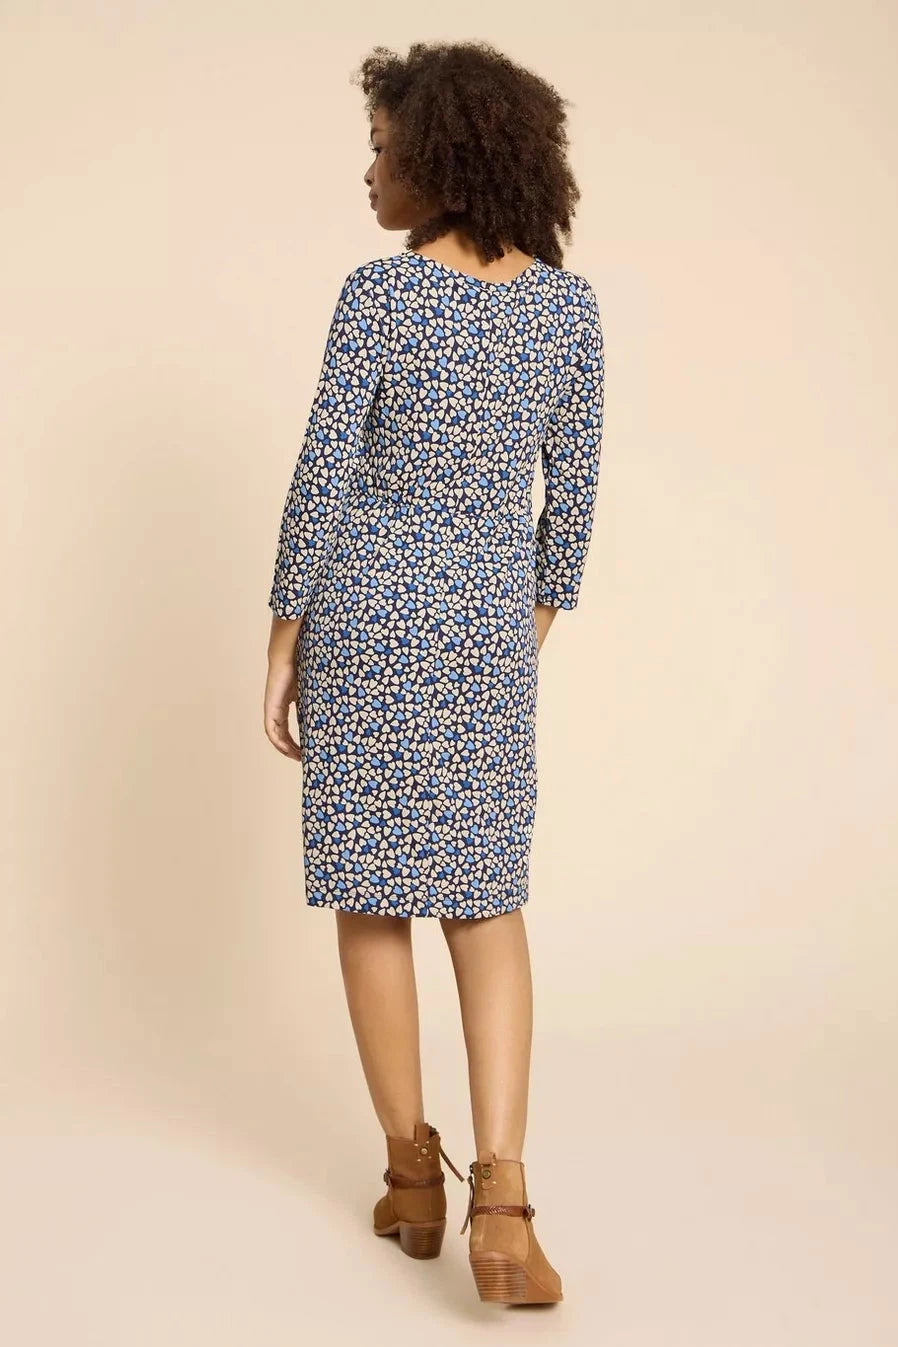 White Stuff Tallie Eco Vero Jersey Dress in Blue Print-Womens-Ohh! By Gum - Shop Sustainable